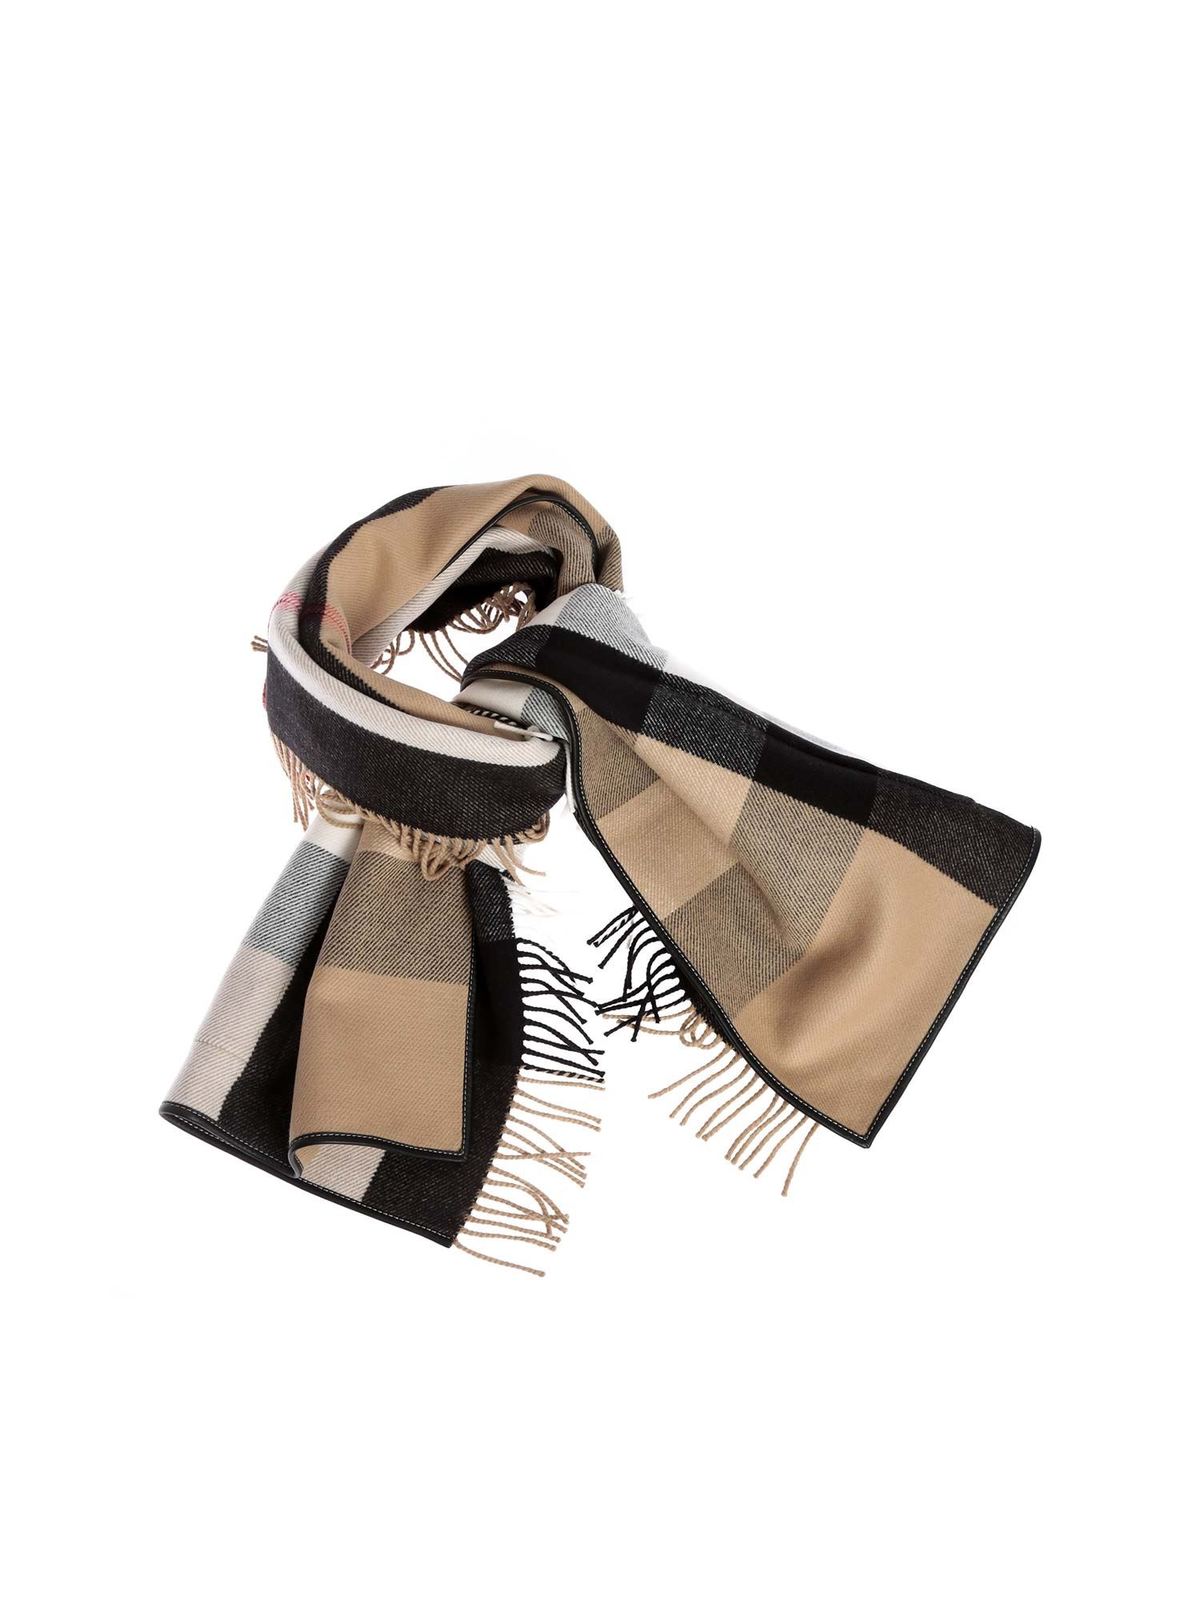 burberry shawl with pockets